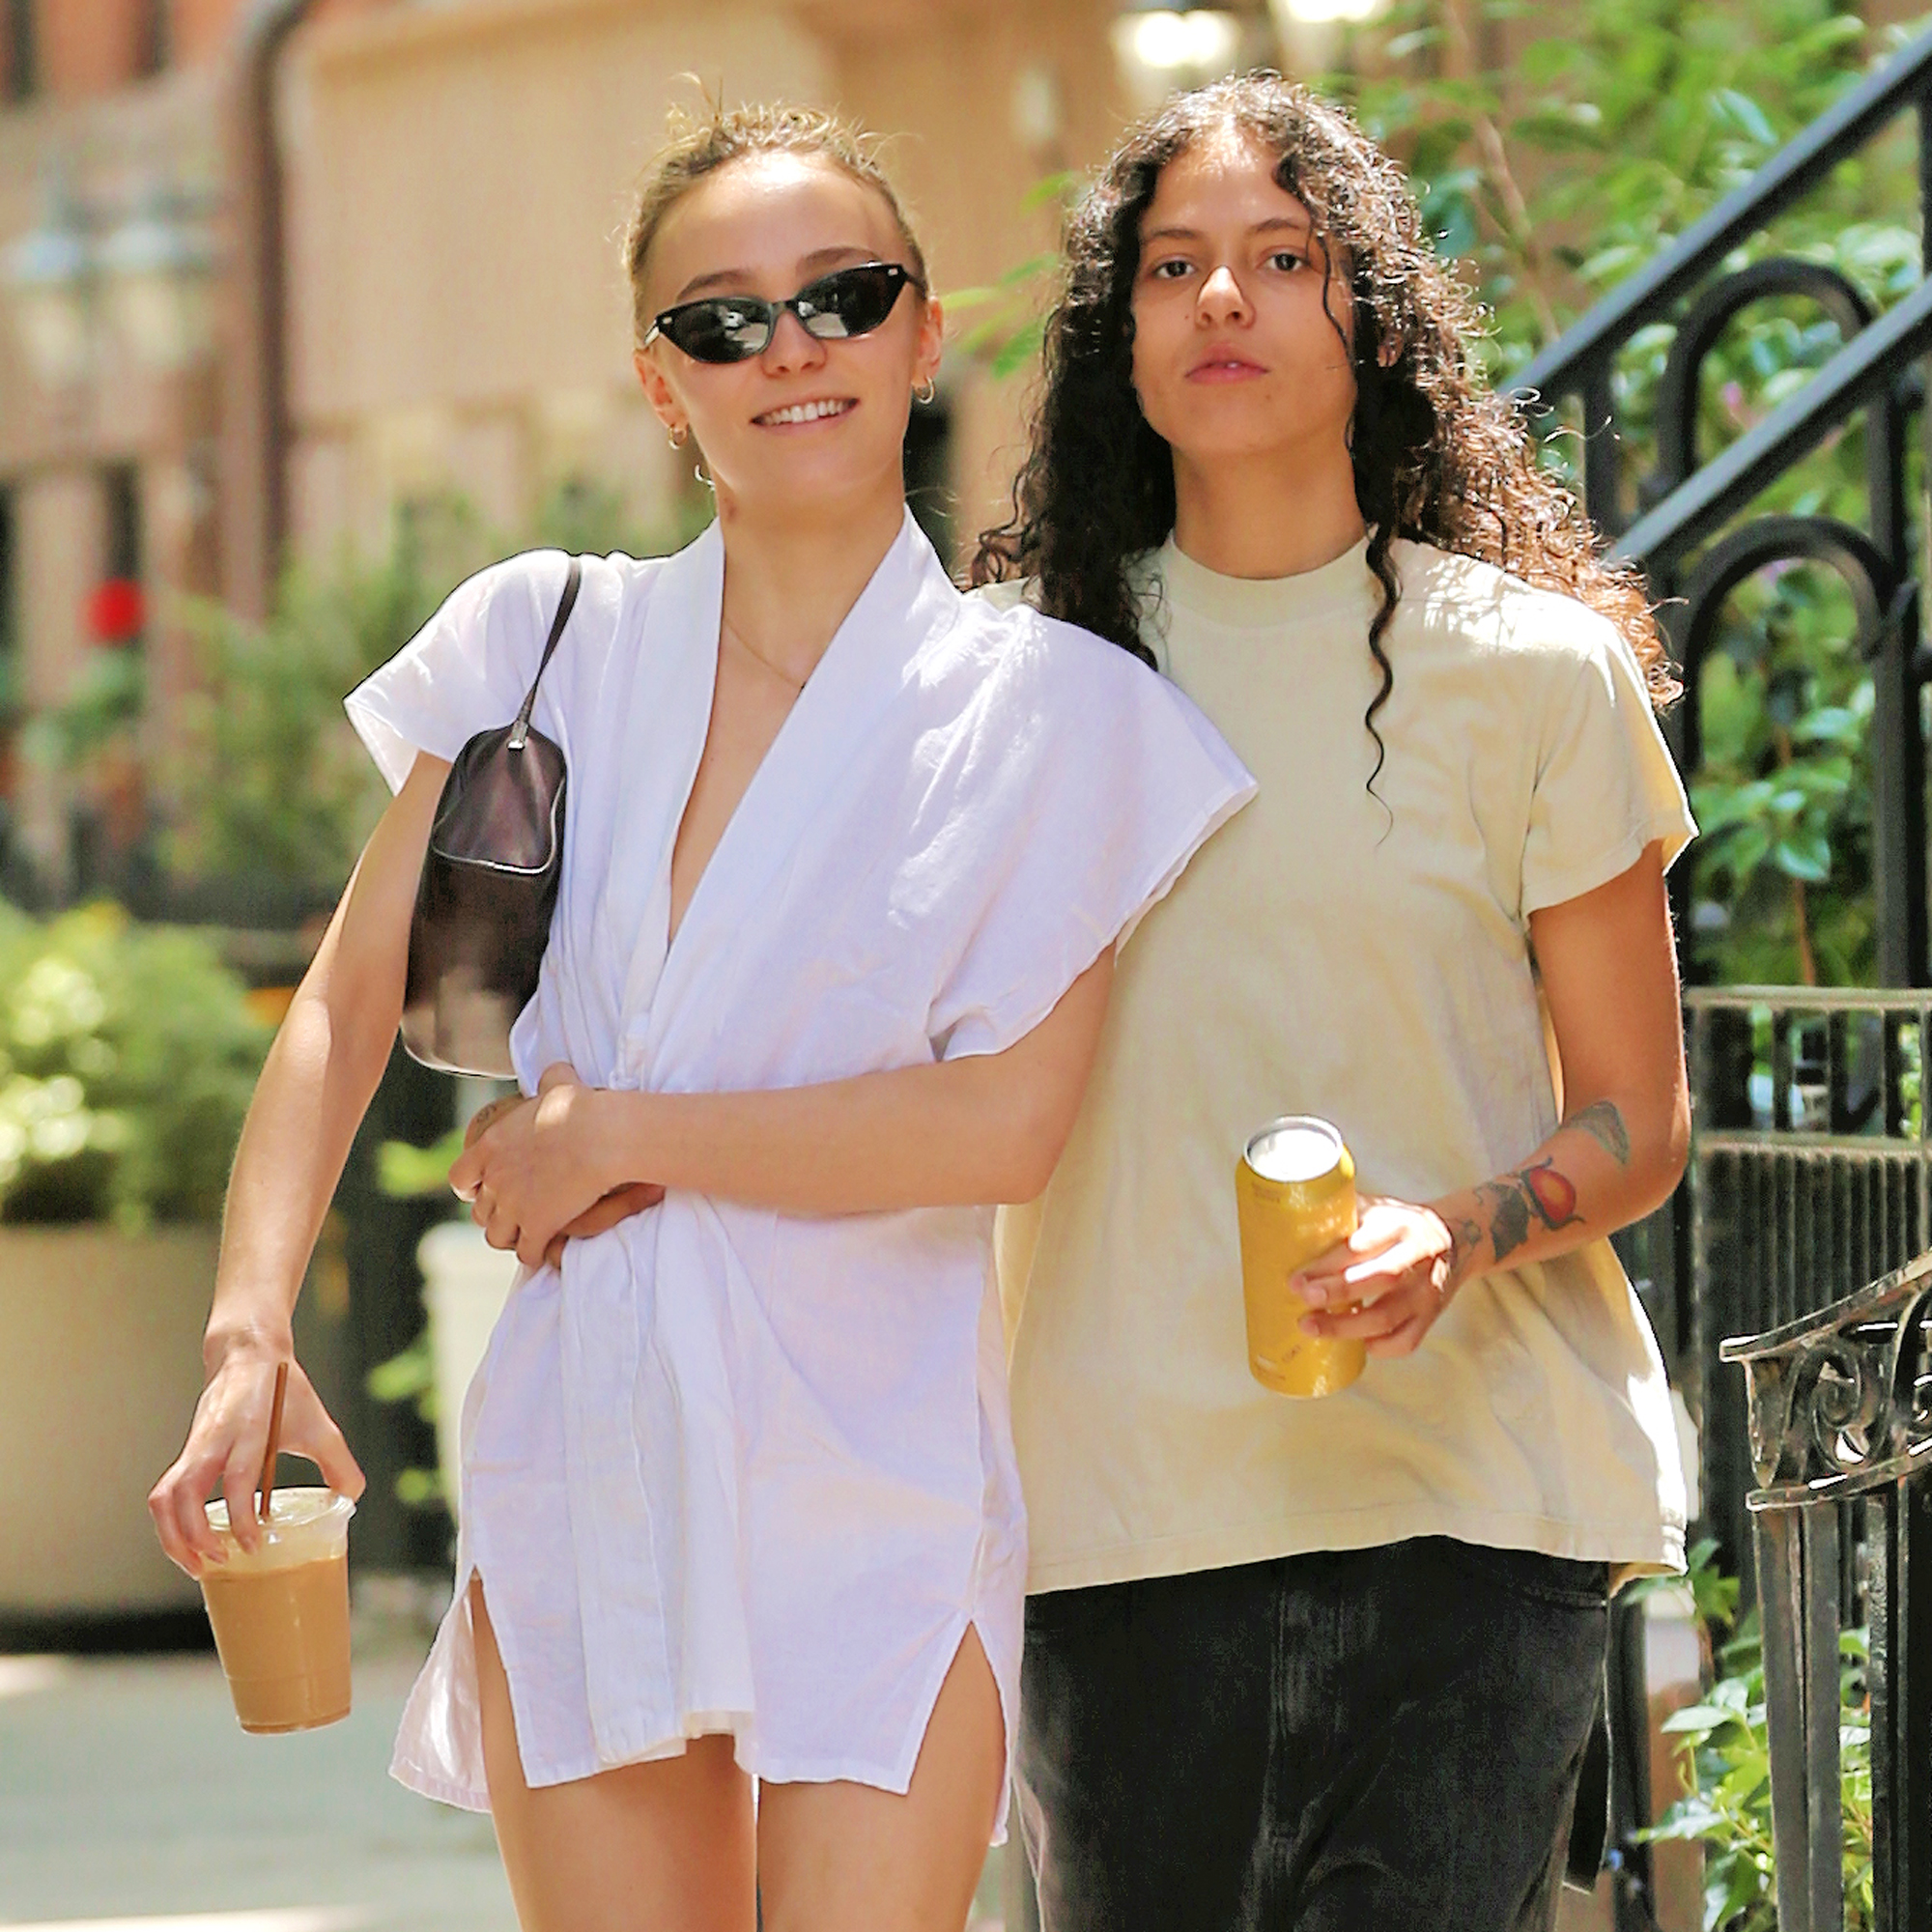 Lily-Rose Depp Cozies Up to Girlfriend 070 Shake In NYC: Photo